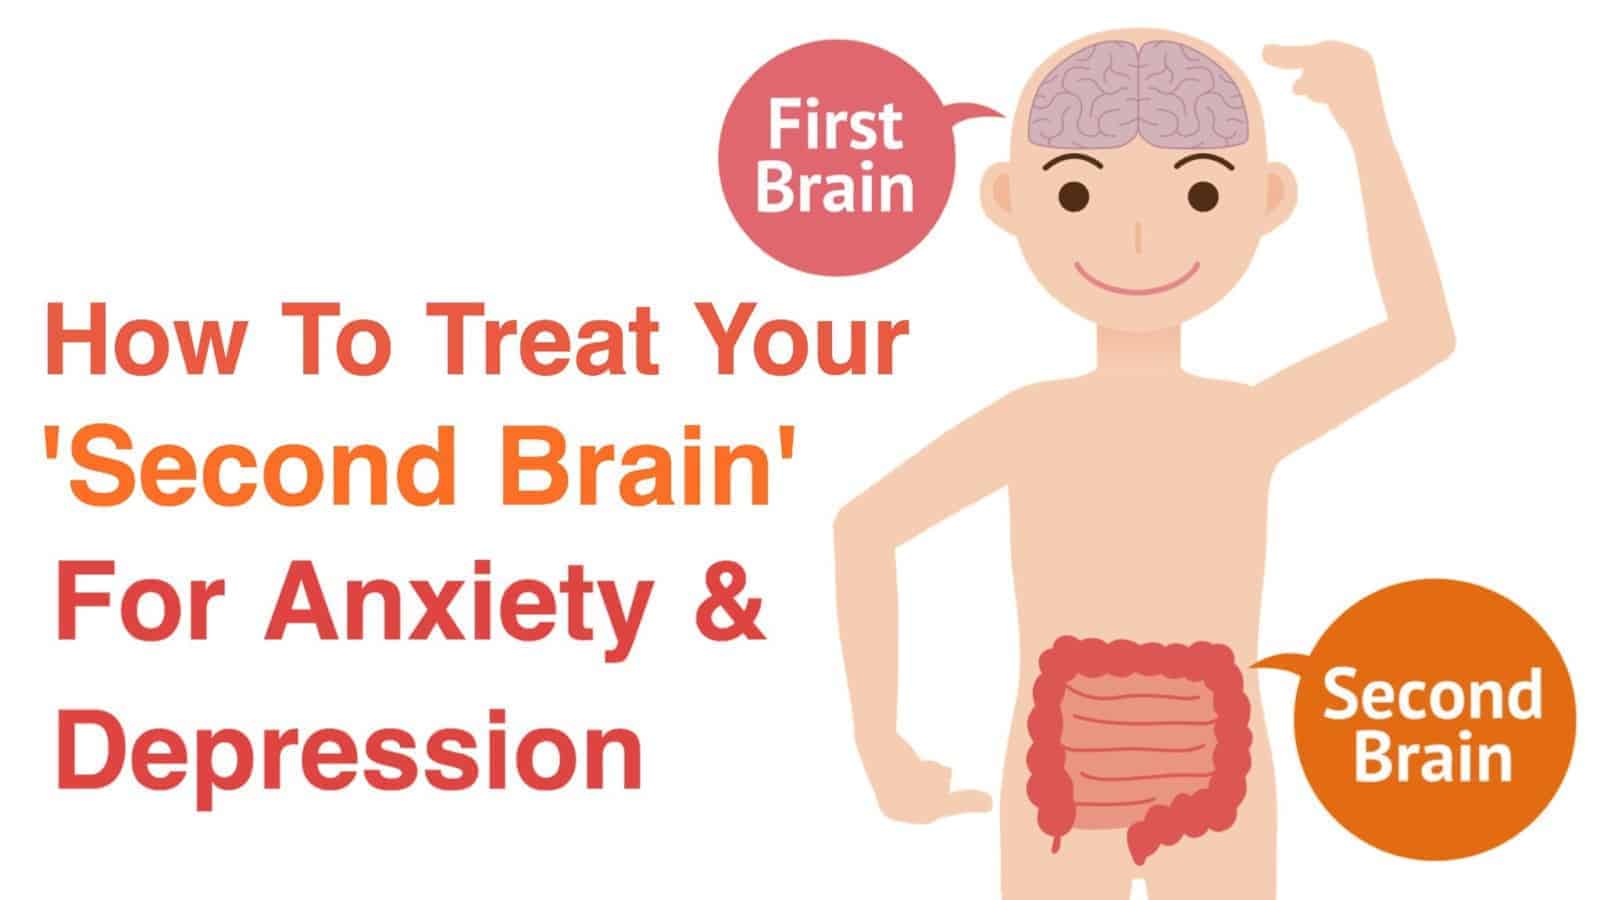 How To Treat Your ‘Second Brain’ For Anxiety and Depression